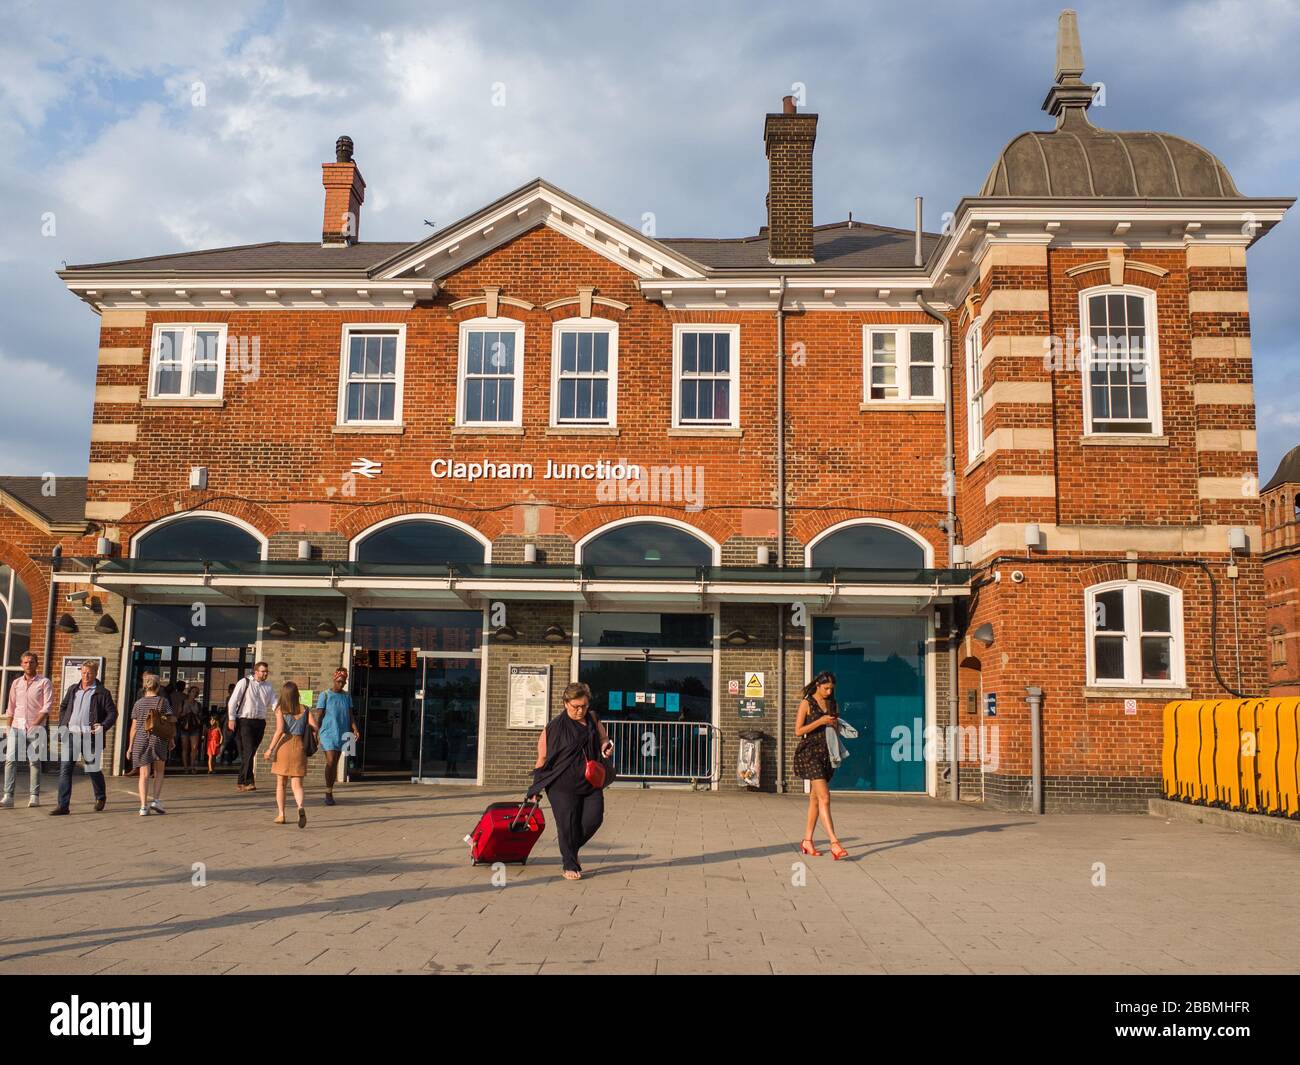 Clapham Junction railway station, a maor transort hub in Battersea, south west London- UK Stock Photo